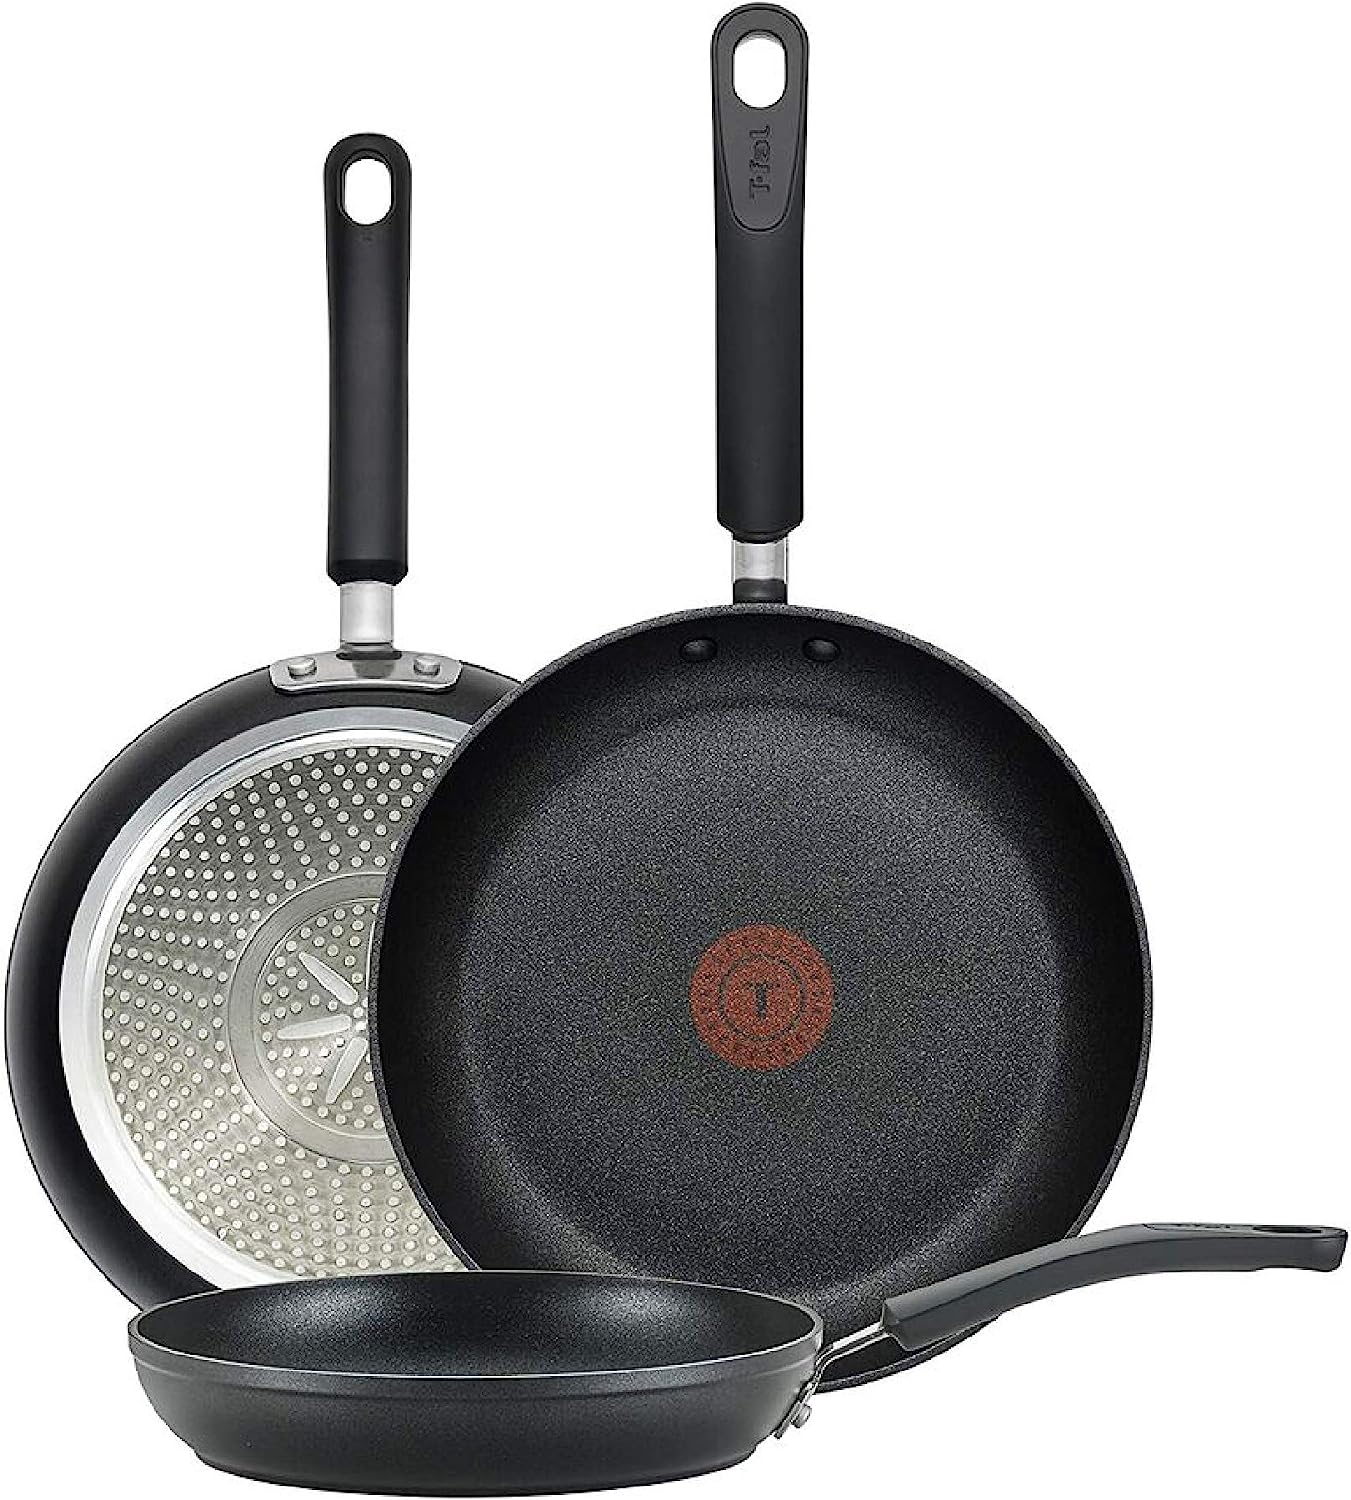 https://bigbigmart.com/wp-content/uploads/2023/06/T-fal-Experience-Nonstick-3-Piece-Fry-Pan-Set-8-10.25-12-Inch-Induction-Cookware-Pots-and-Pans-Dishwasher-Safe-Black.jpg